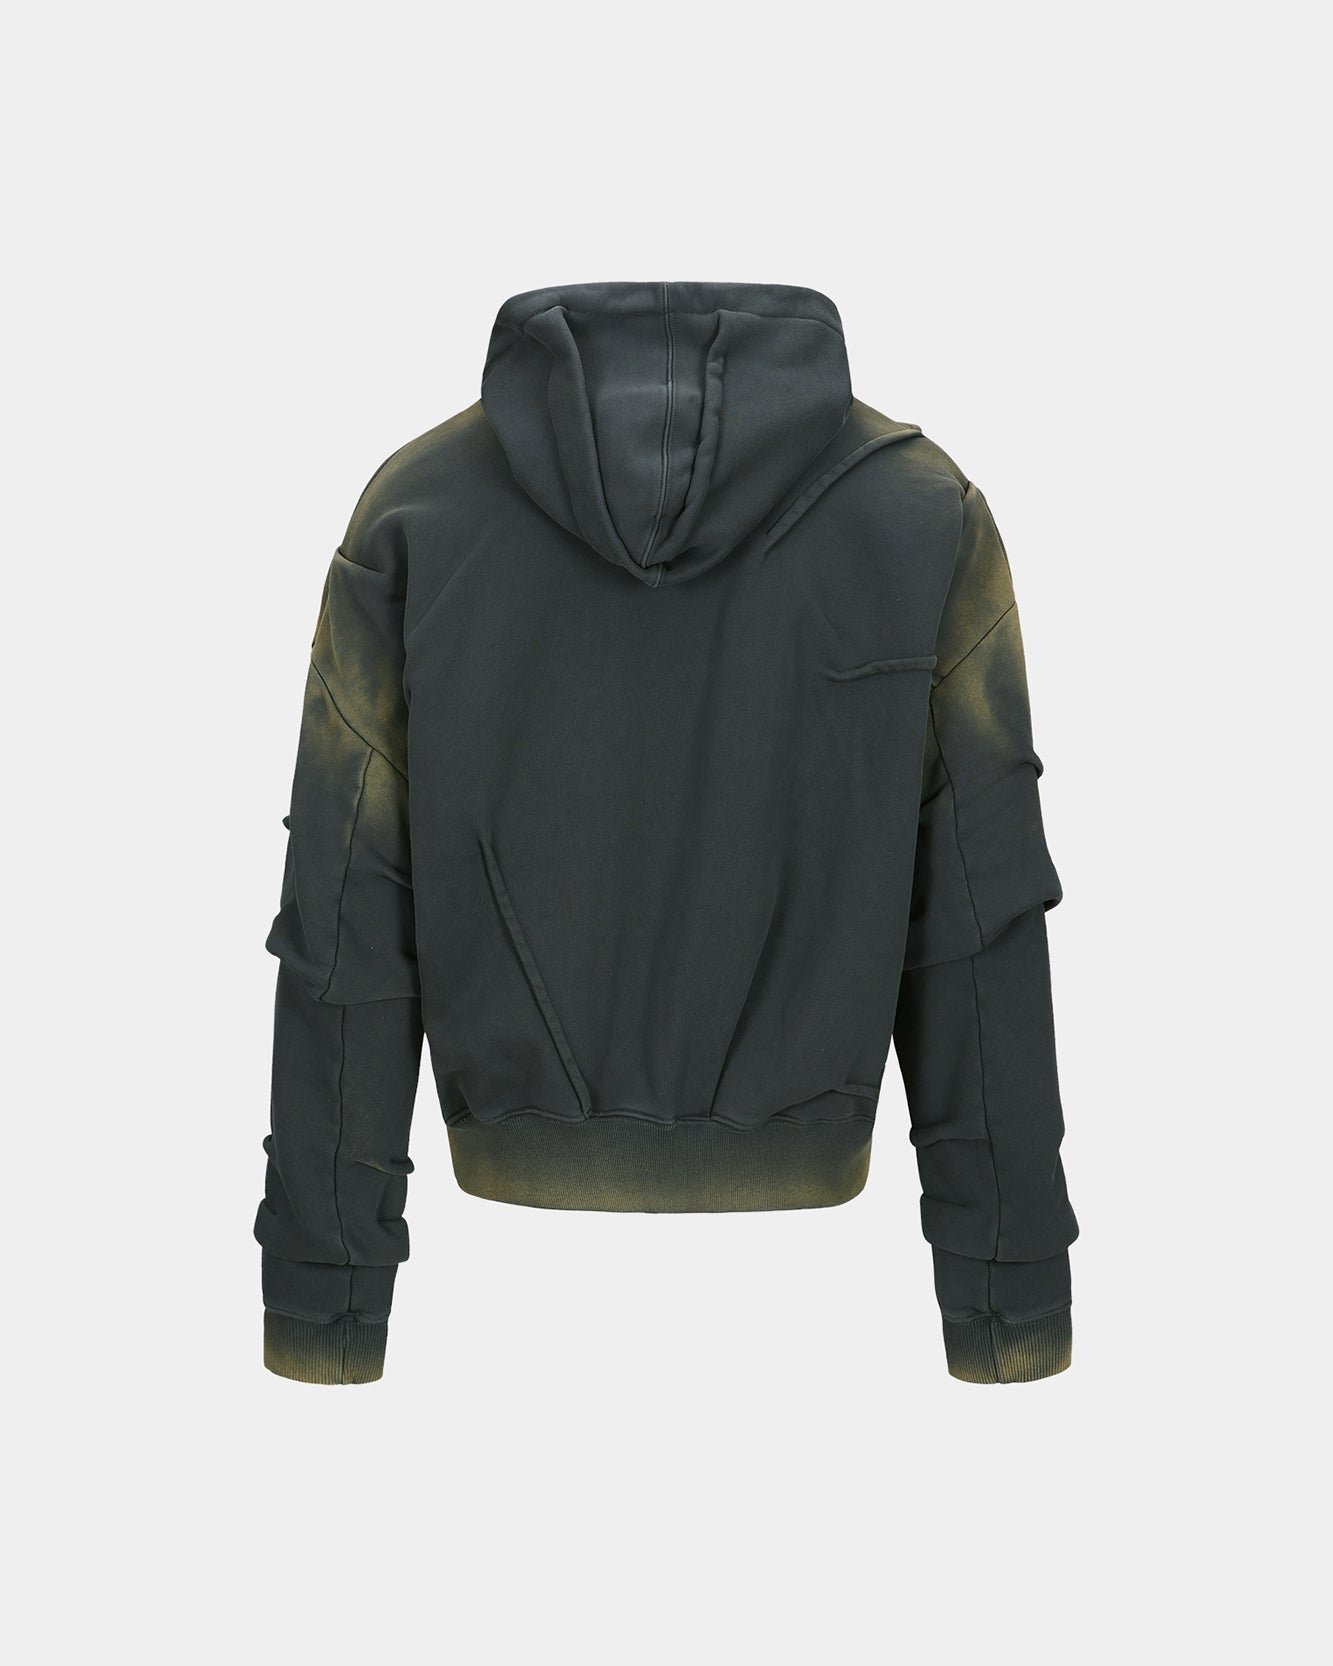 Andersson Bell MARDRO GRADIENT HOODIE atb1080m(CHARCOAL)